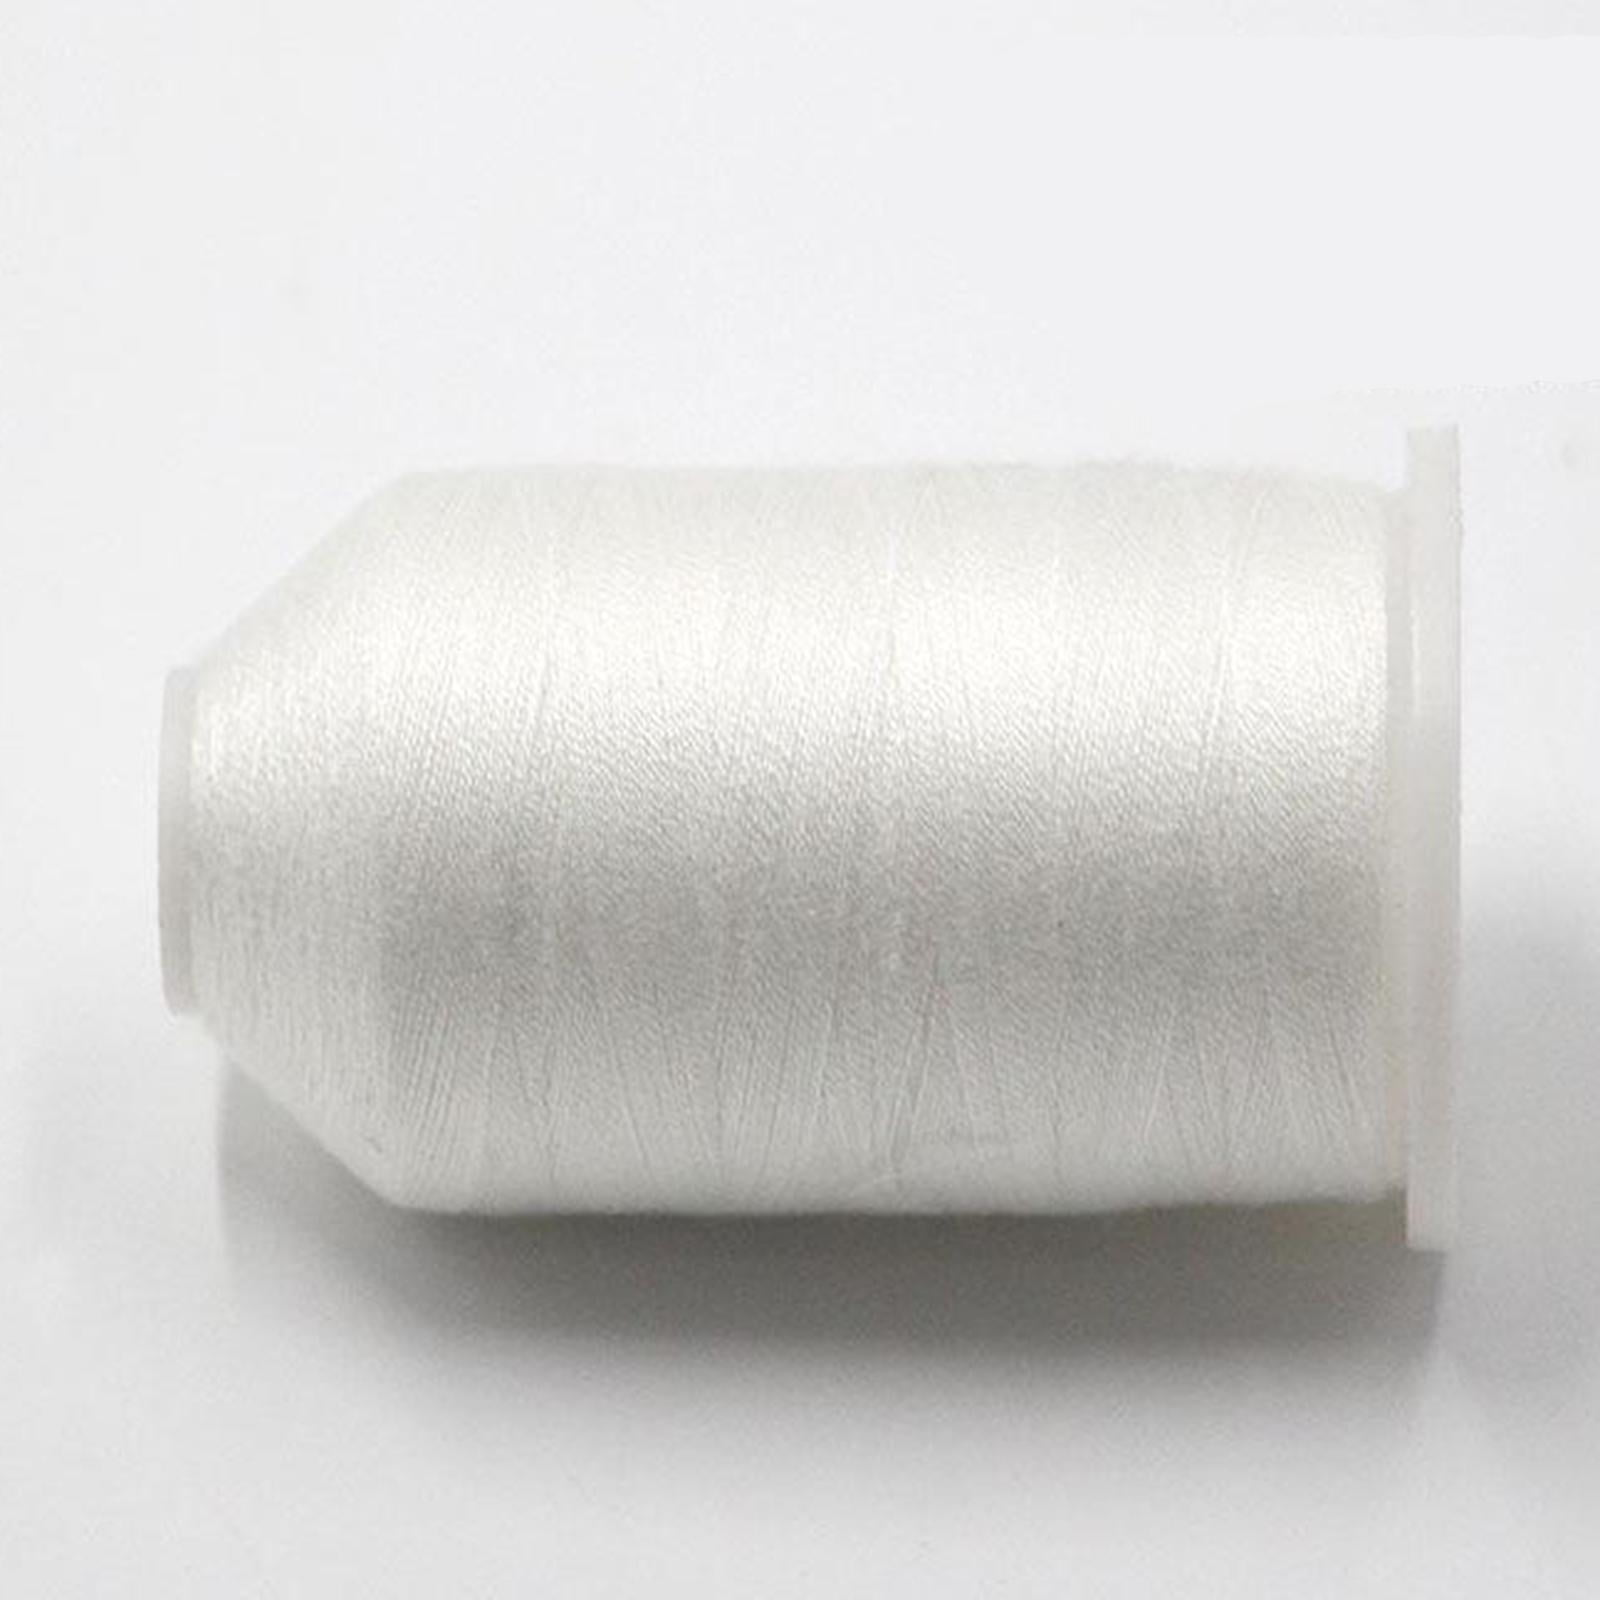 1094 Yard White 402 Water Soluble Sewing Thread for Garment DIY Dressmaker, Size: 1000M